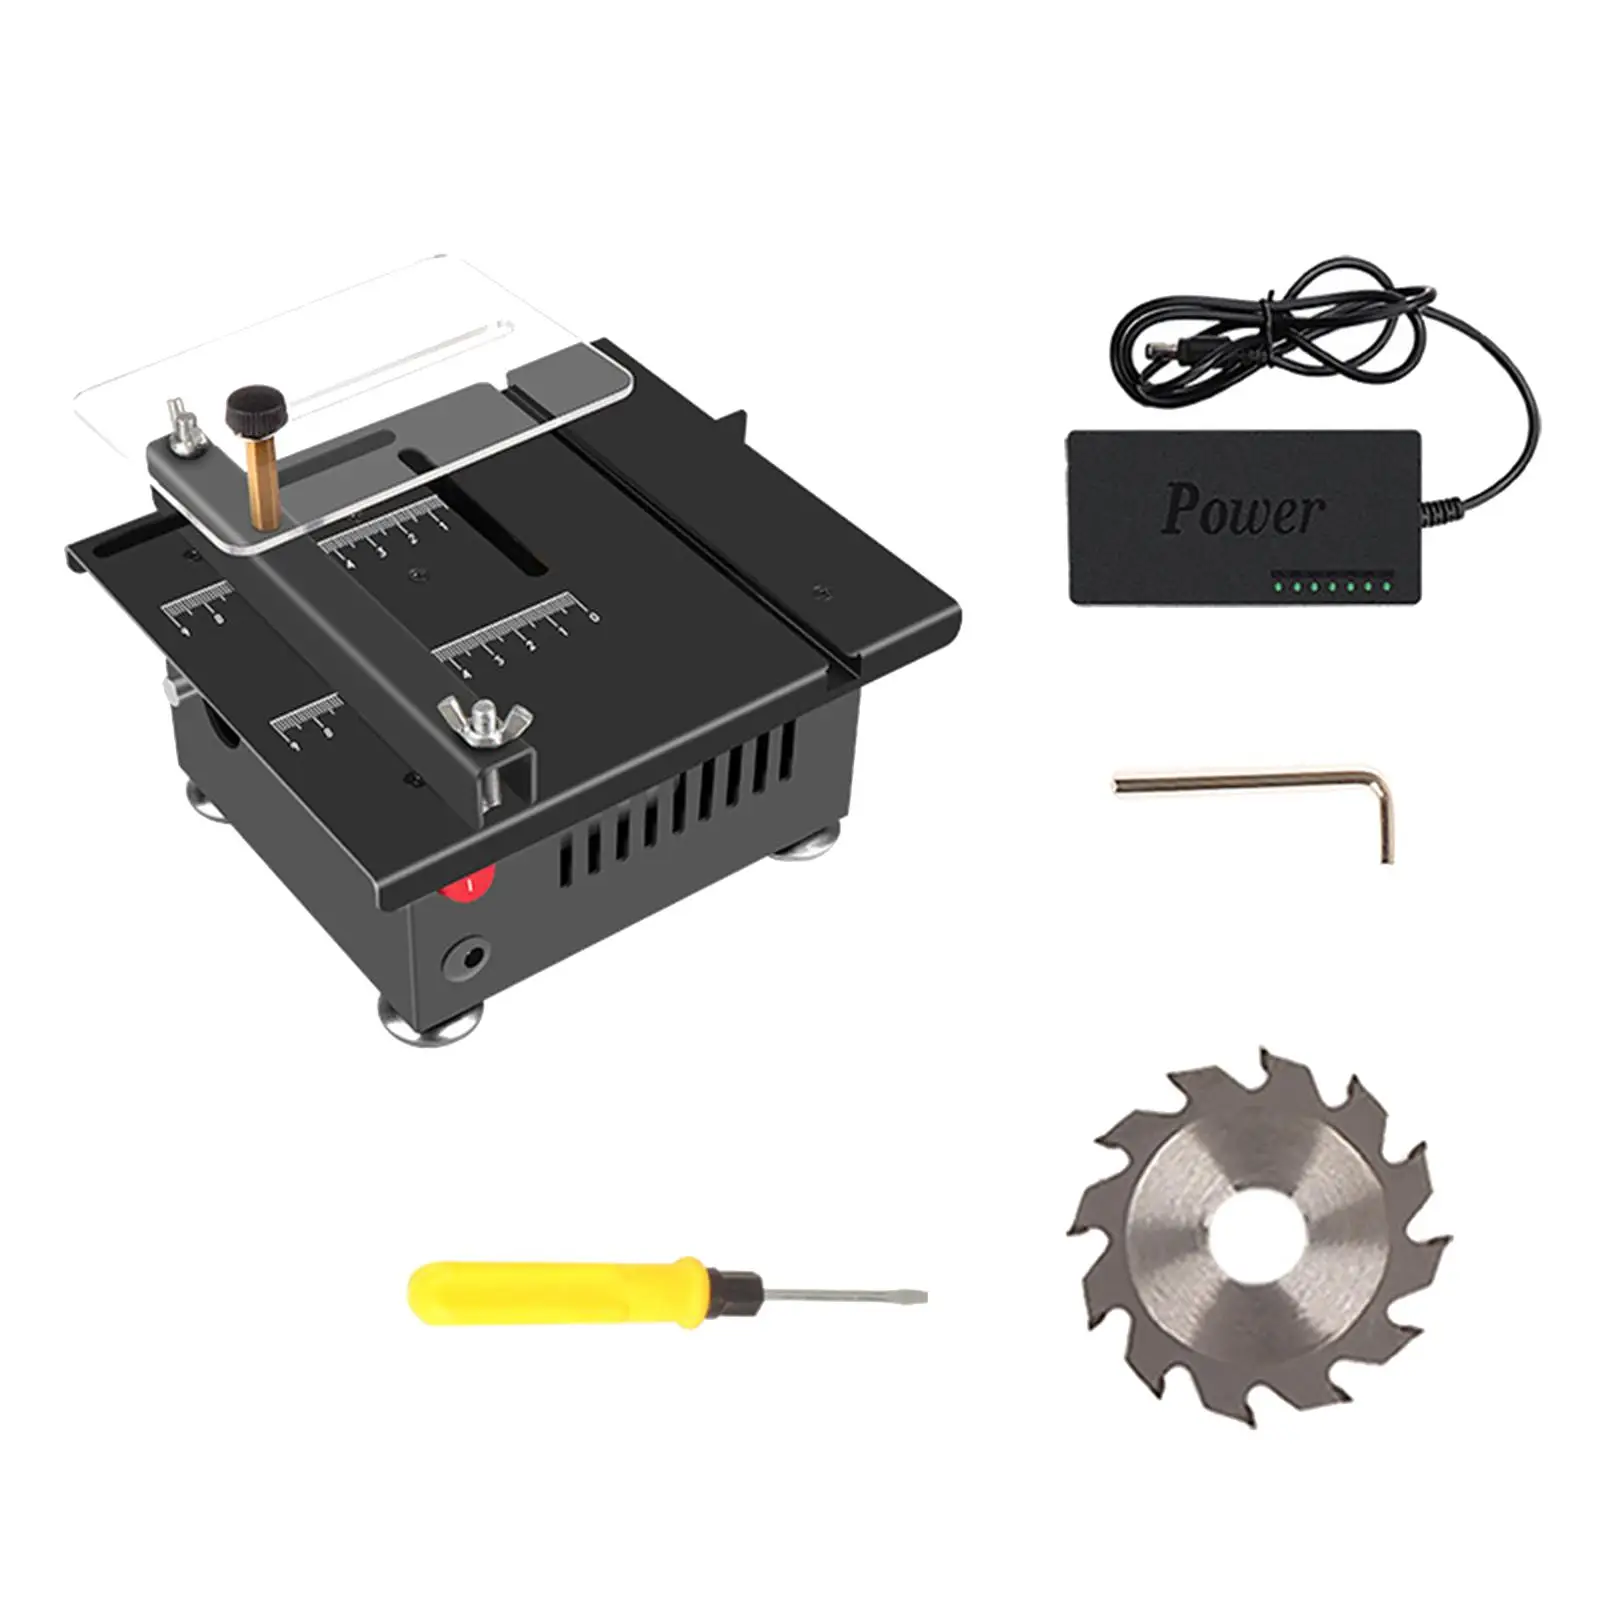 Mini Table Saw Woodworking Bench Saw 100W Portable Tabletop Saw for Wood Cutting DIY Crafts Model Making Handicraft Workshop US